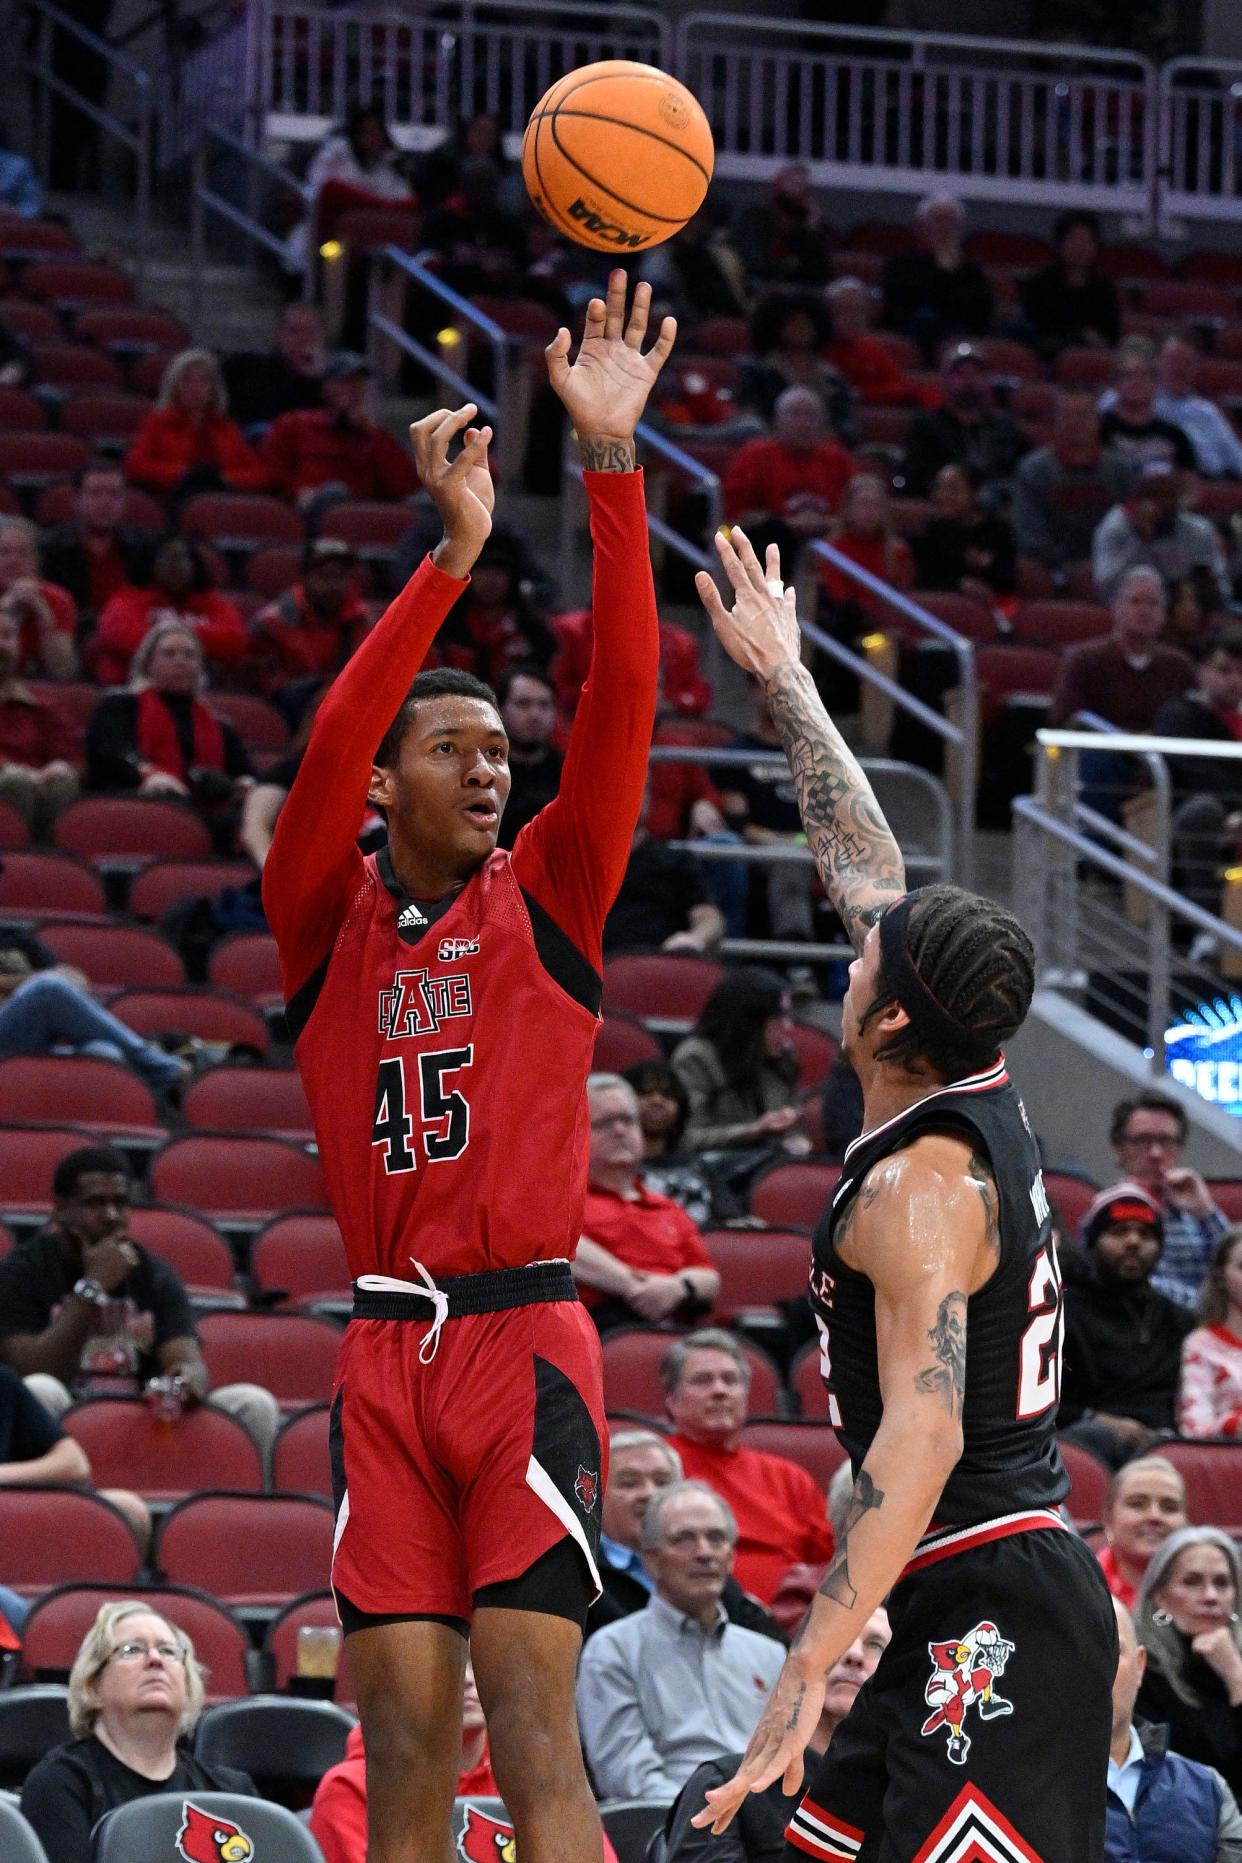 Arkansas State forward Dyondre Dominguez is averaging 12.1 points and 8.7 rebounds a game in his first year at the school.